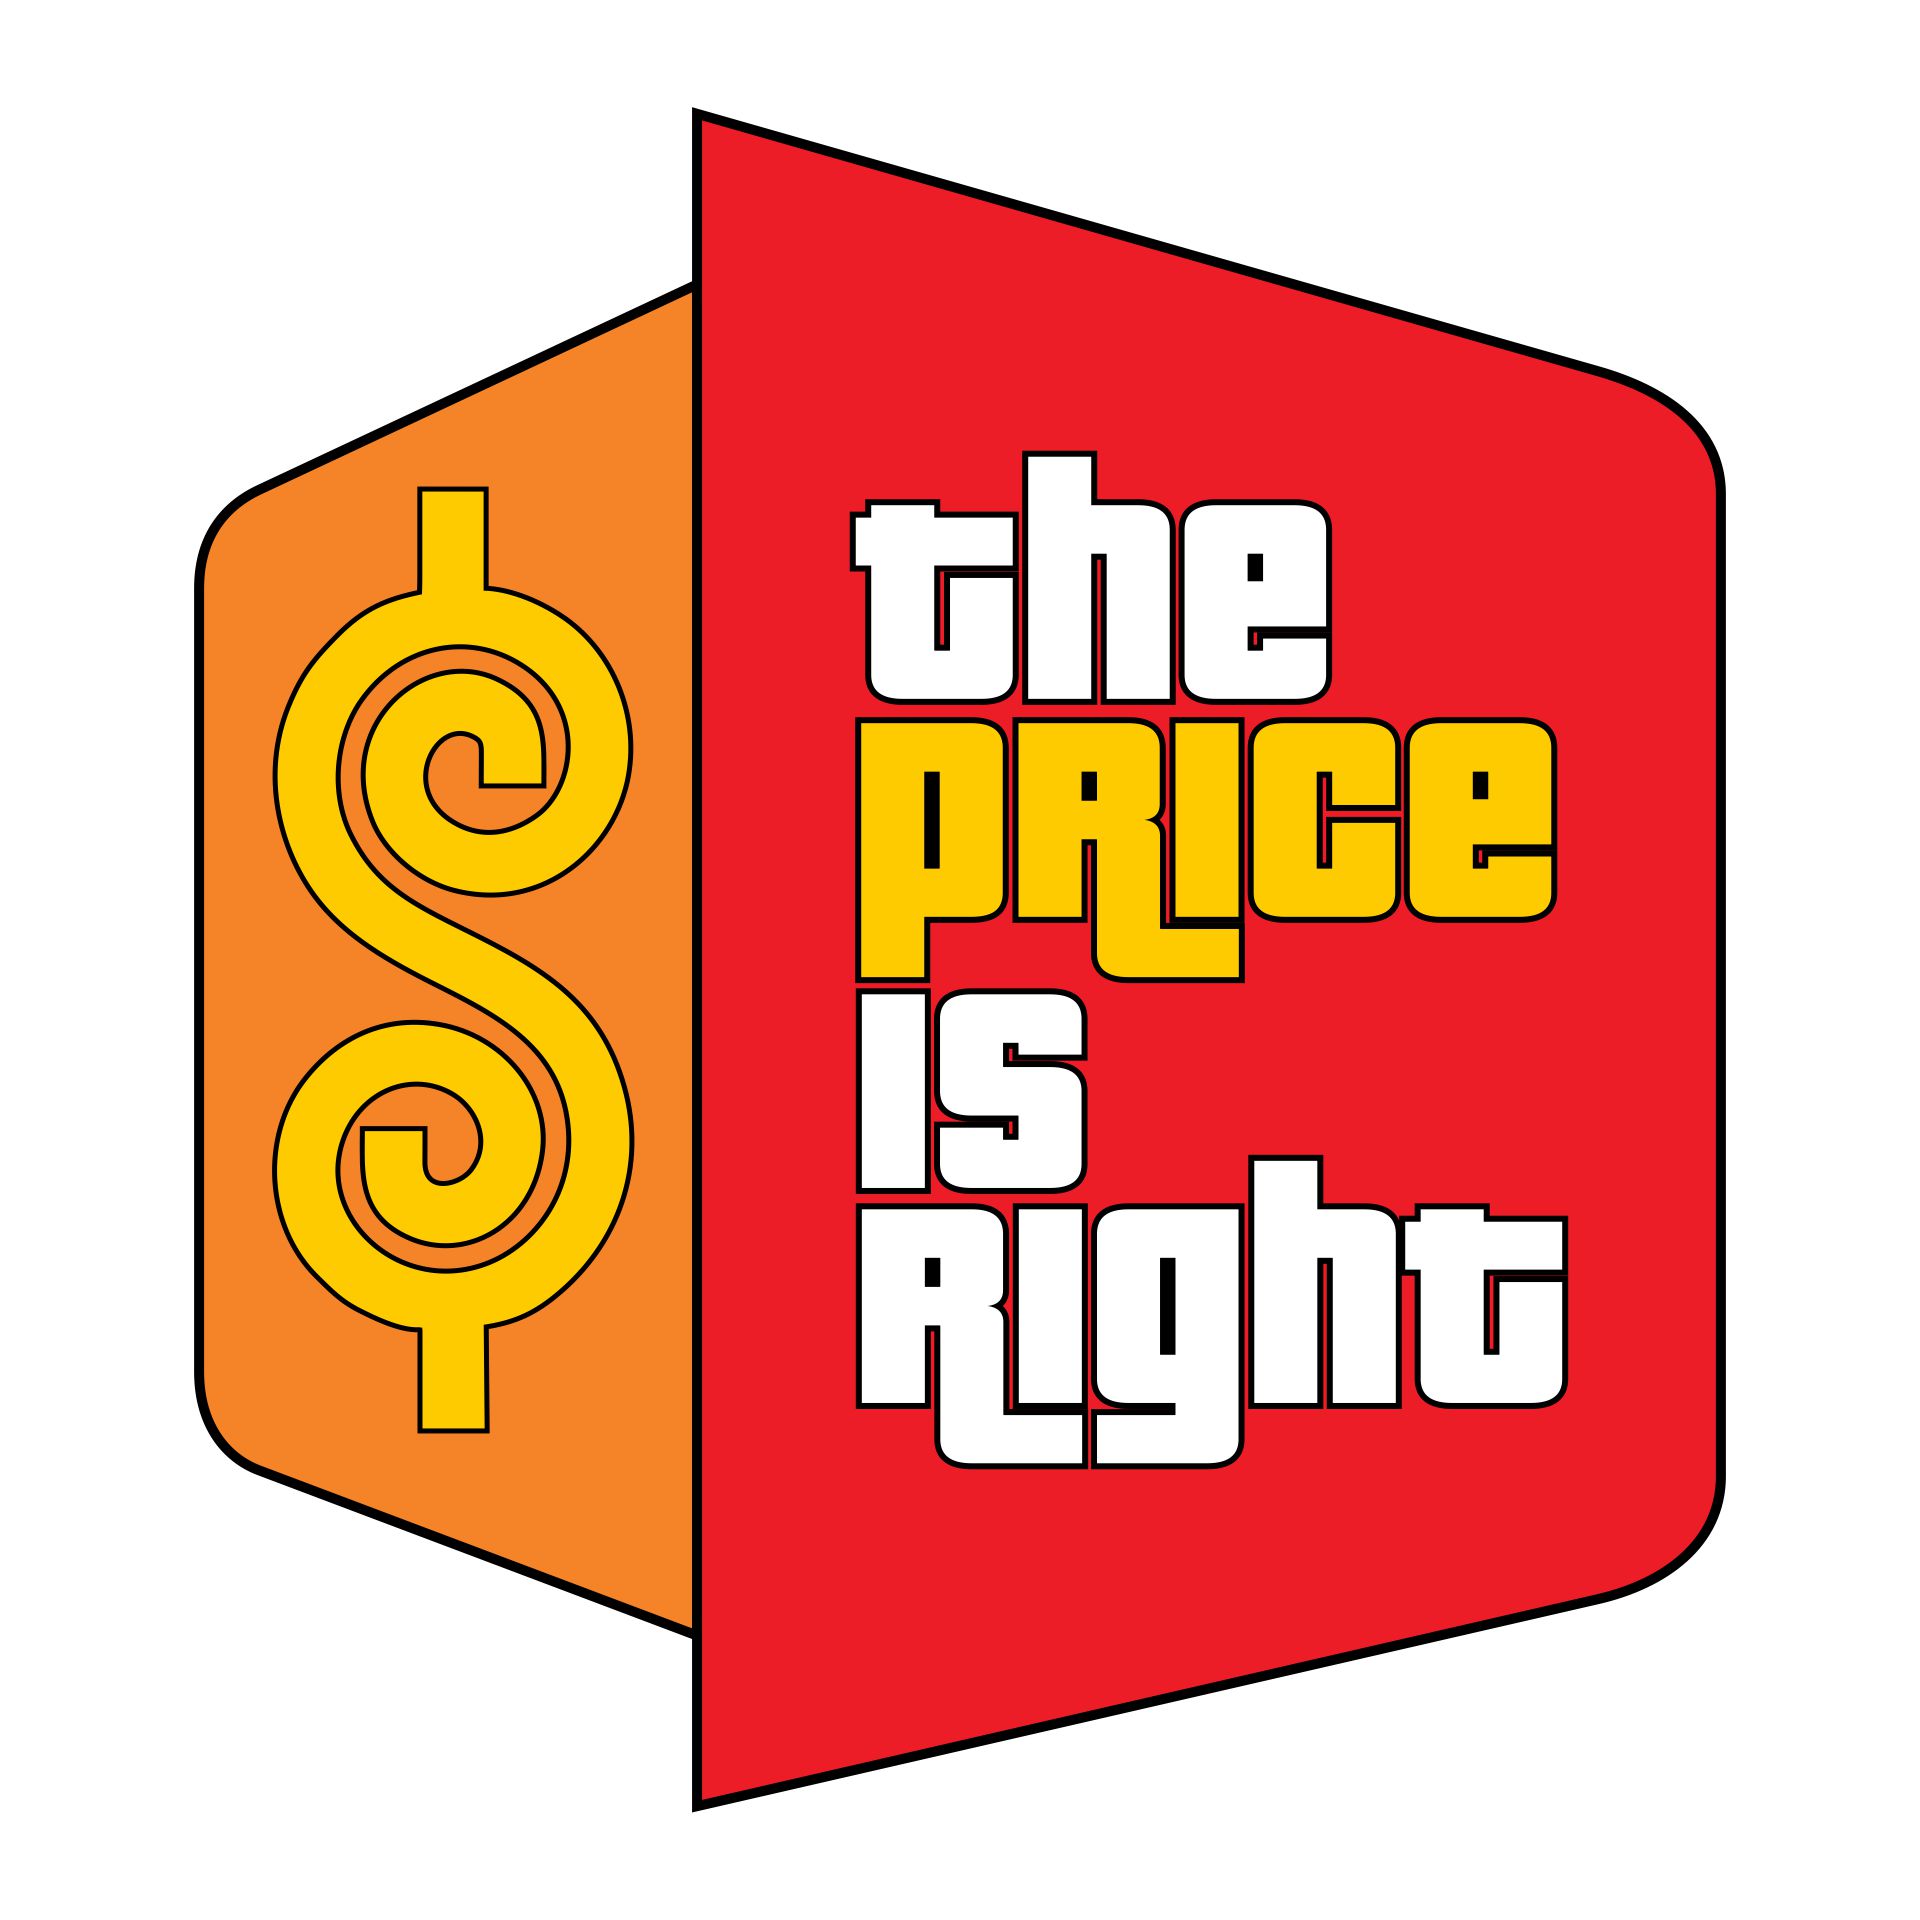 9 Best Images Of Printable Price Is Right Logo Price Is Right Pricing Photo Price Is Right